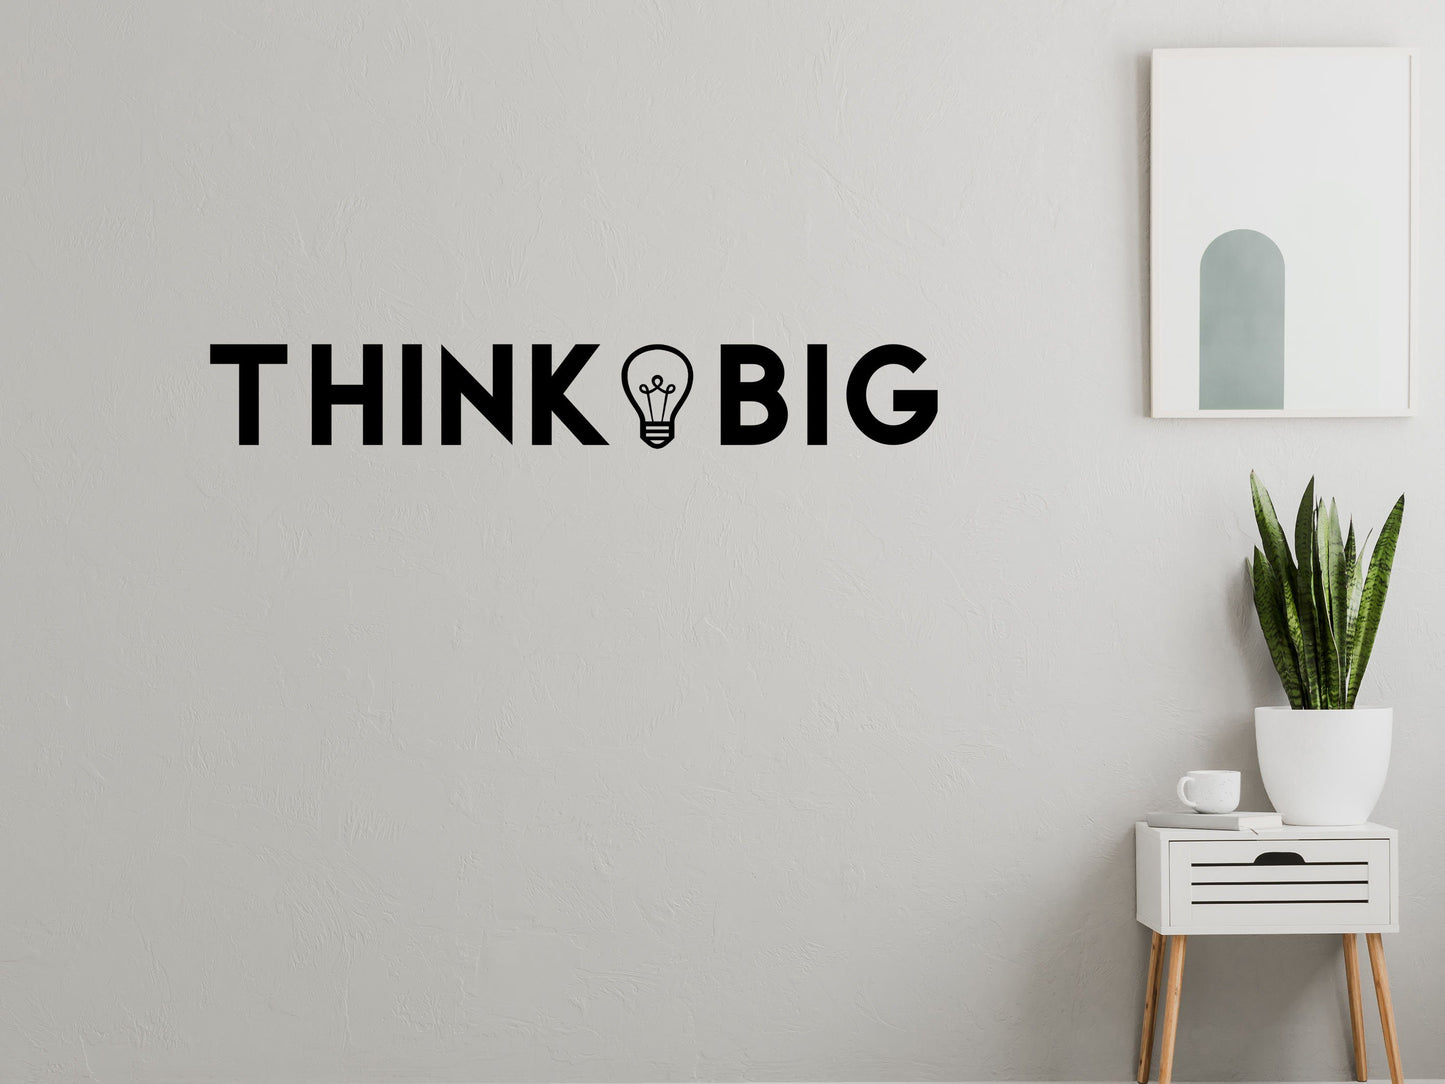 Think Big Decal Office Motivational Decal- Inspirational Wall Signs Vinyl Wall Decal Done 